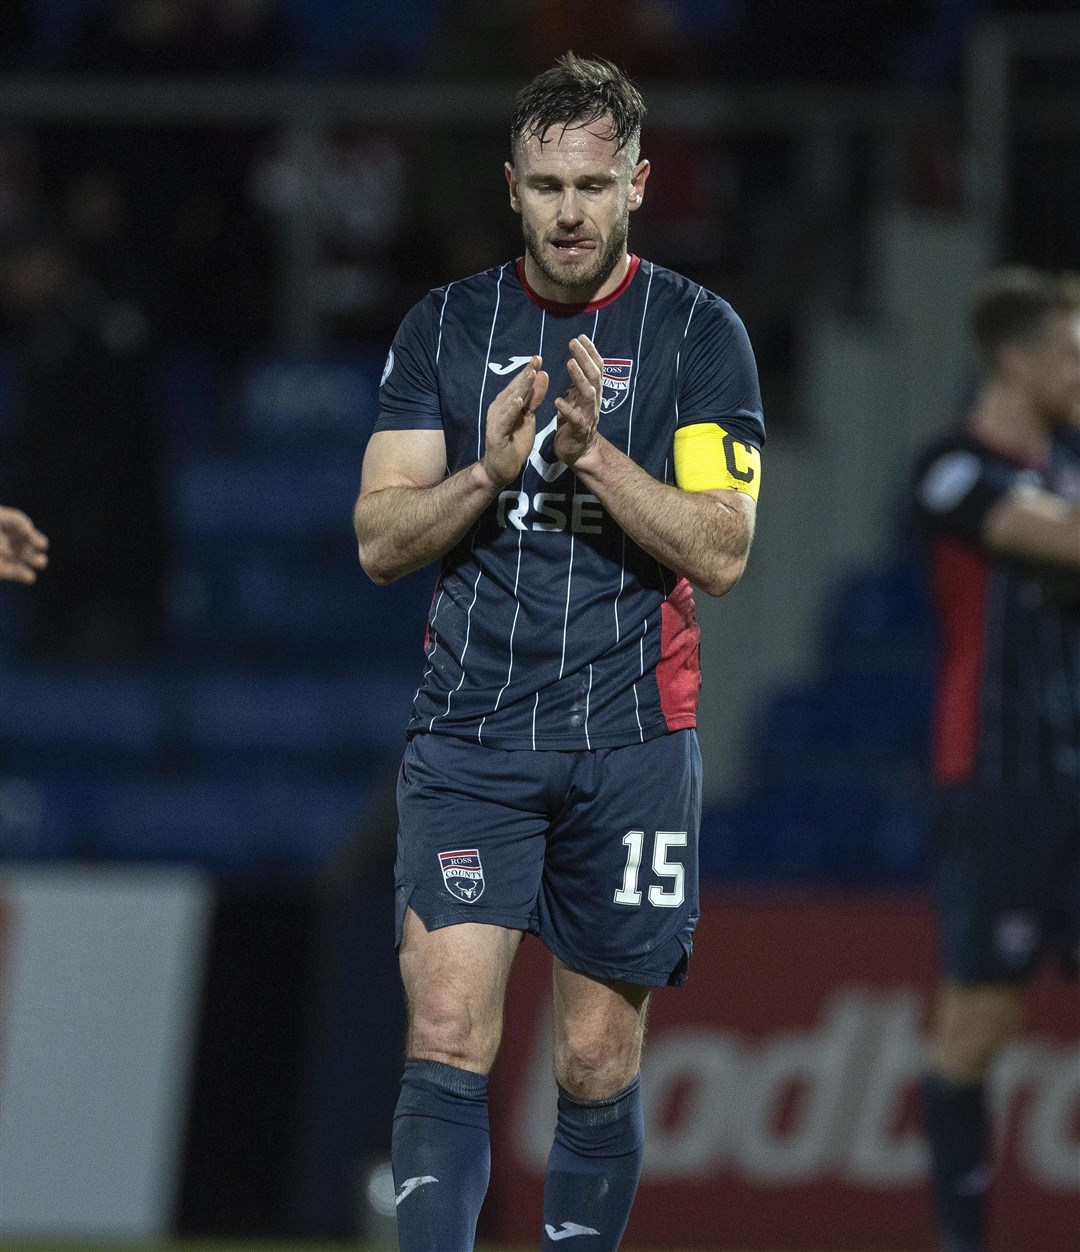 Picture - Ken Macpherson. Ross County(1) v Aberdeen(1). 01.02.22. Ross County's Keith Watson applauds fans at the end.